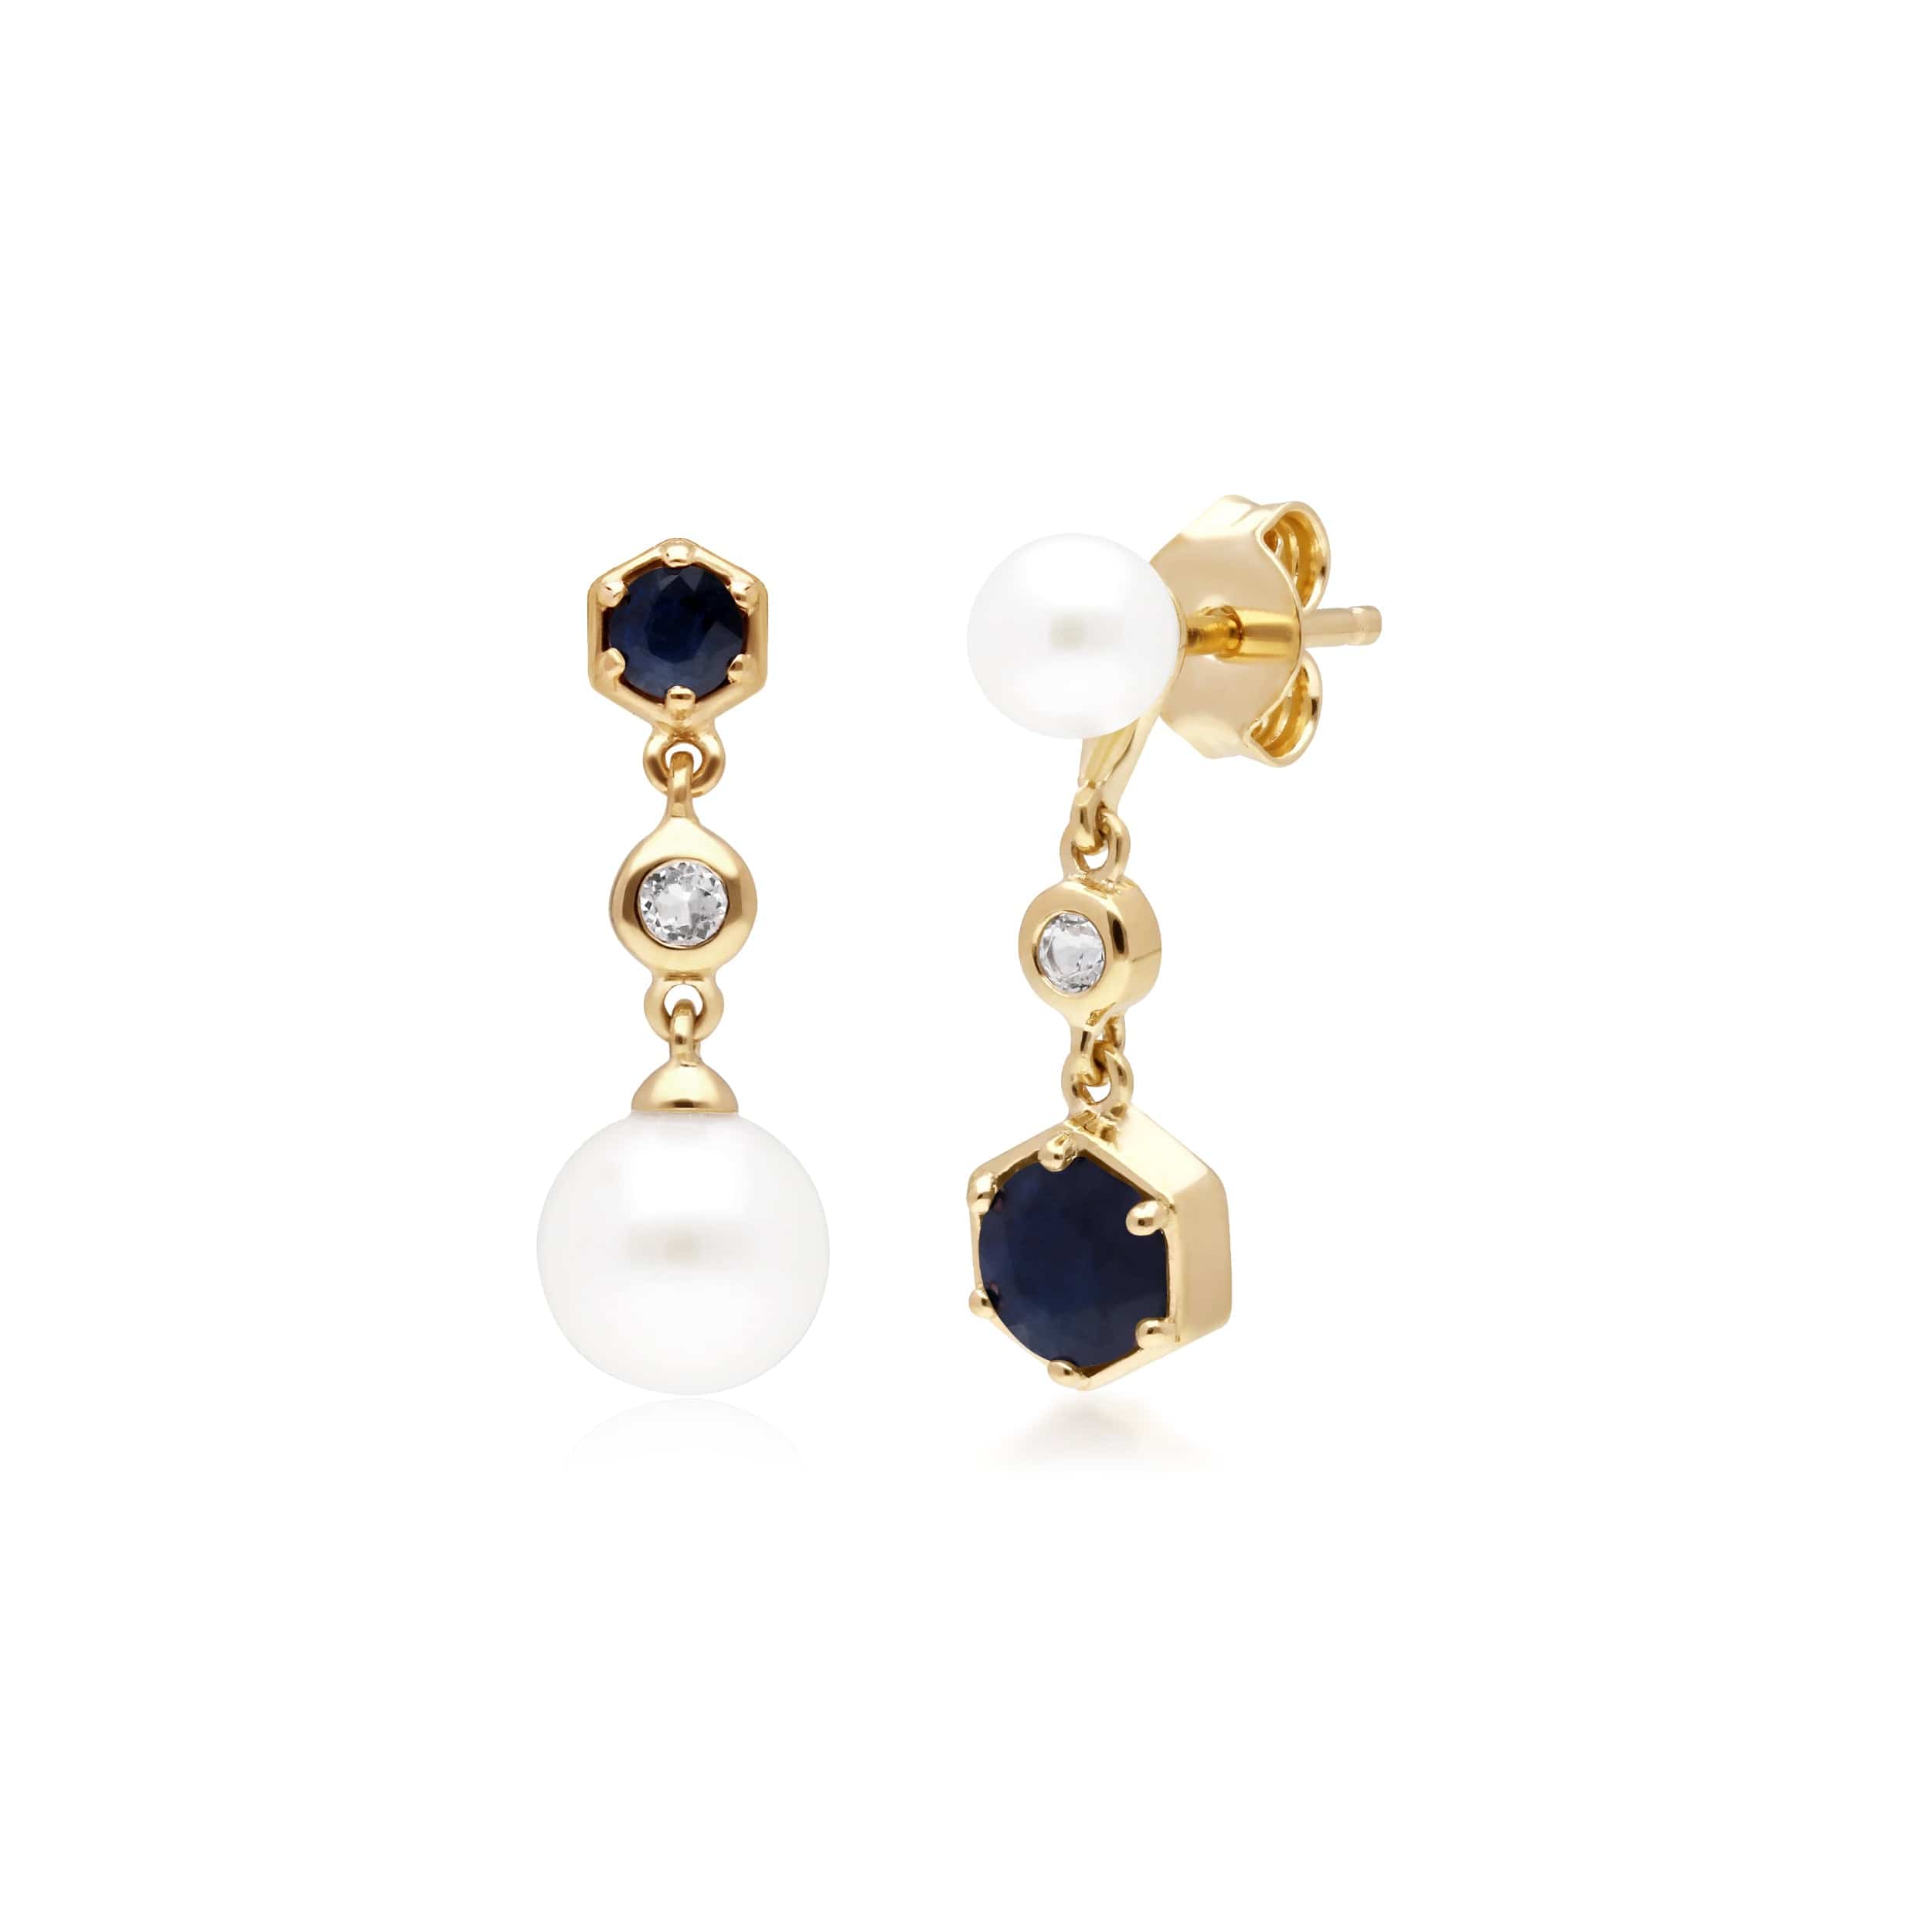 Modern Pearl, Sapphire & Topaz Mismatched Drop Earrings in Gold Plated Sterling Silver